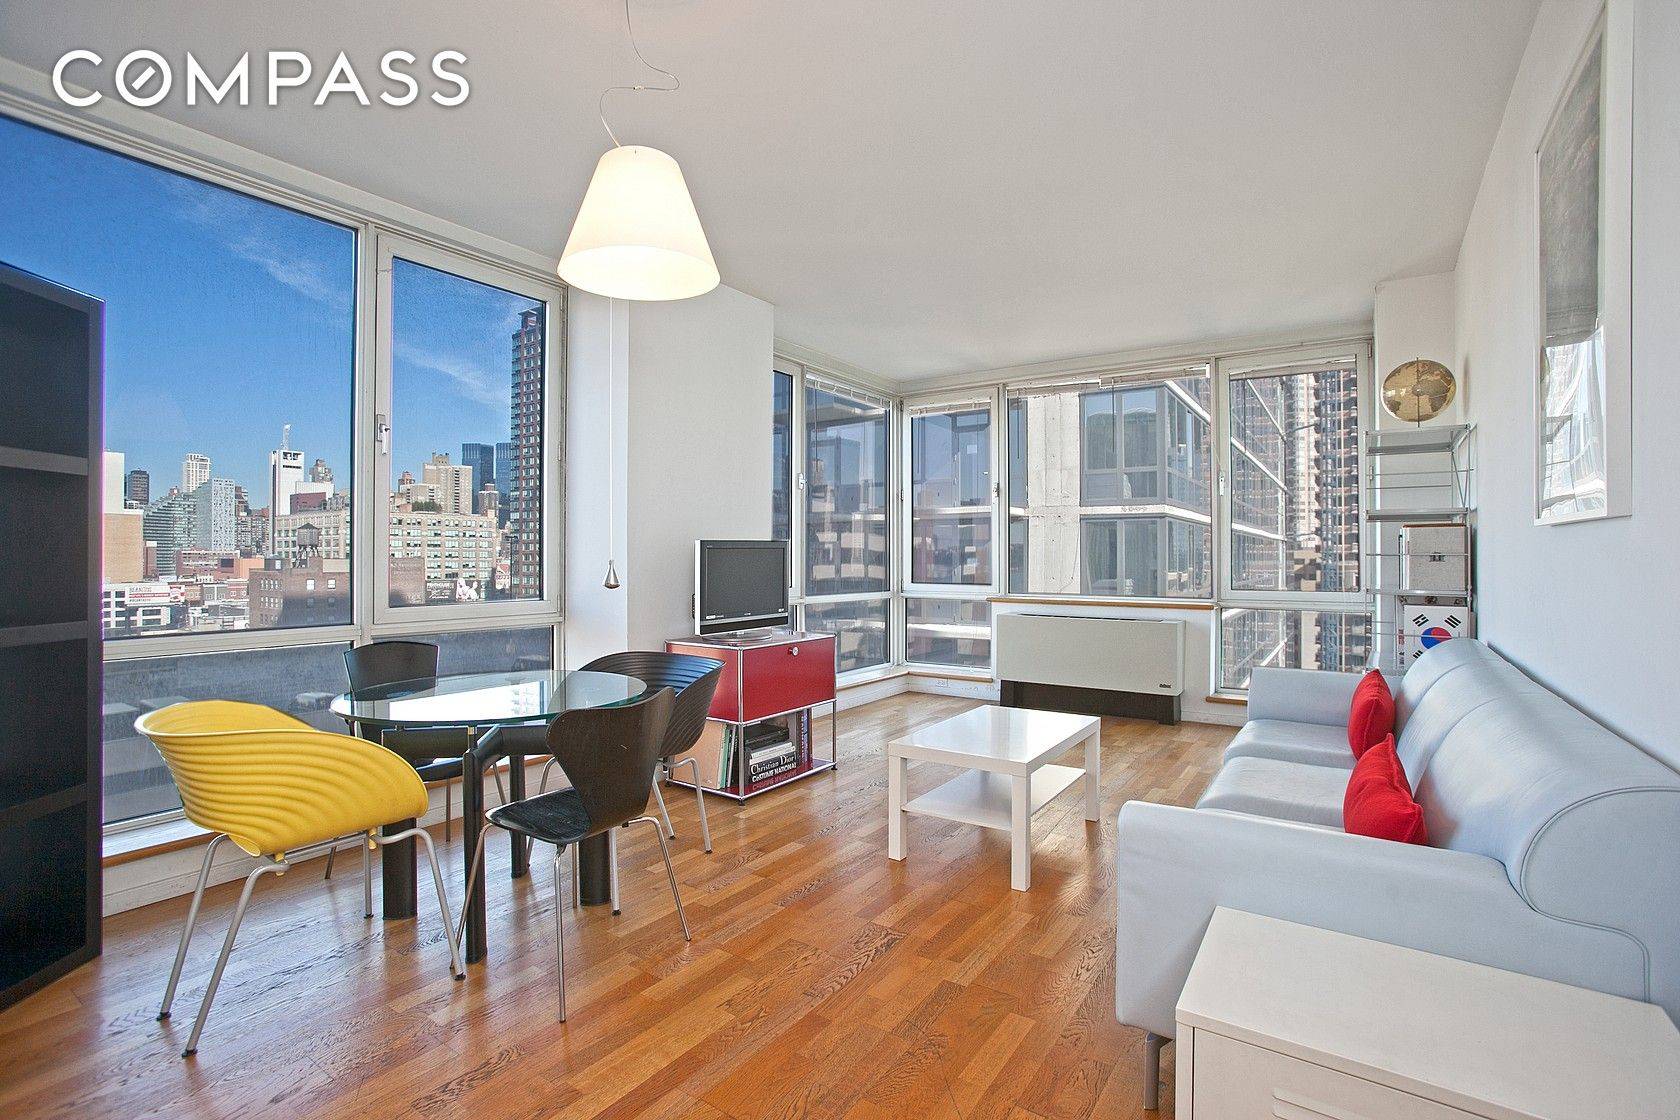 This 1 bedroom, 1 bathroom residence is a corner unit with North, East and South exposures that offer spectacular city including Empire State building, river and George Washington Bridge views.